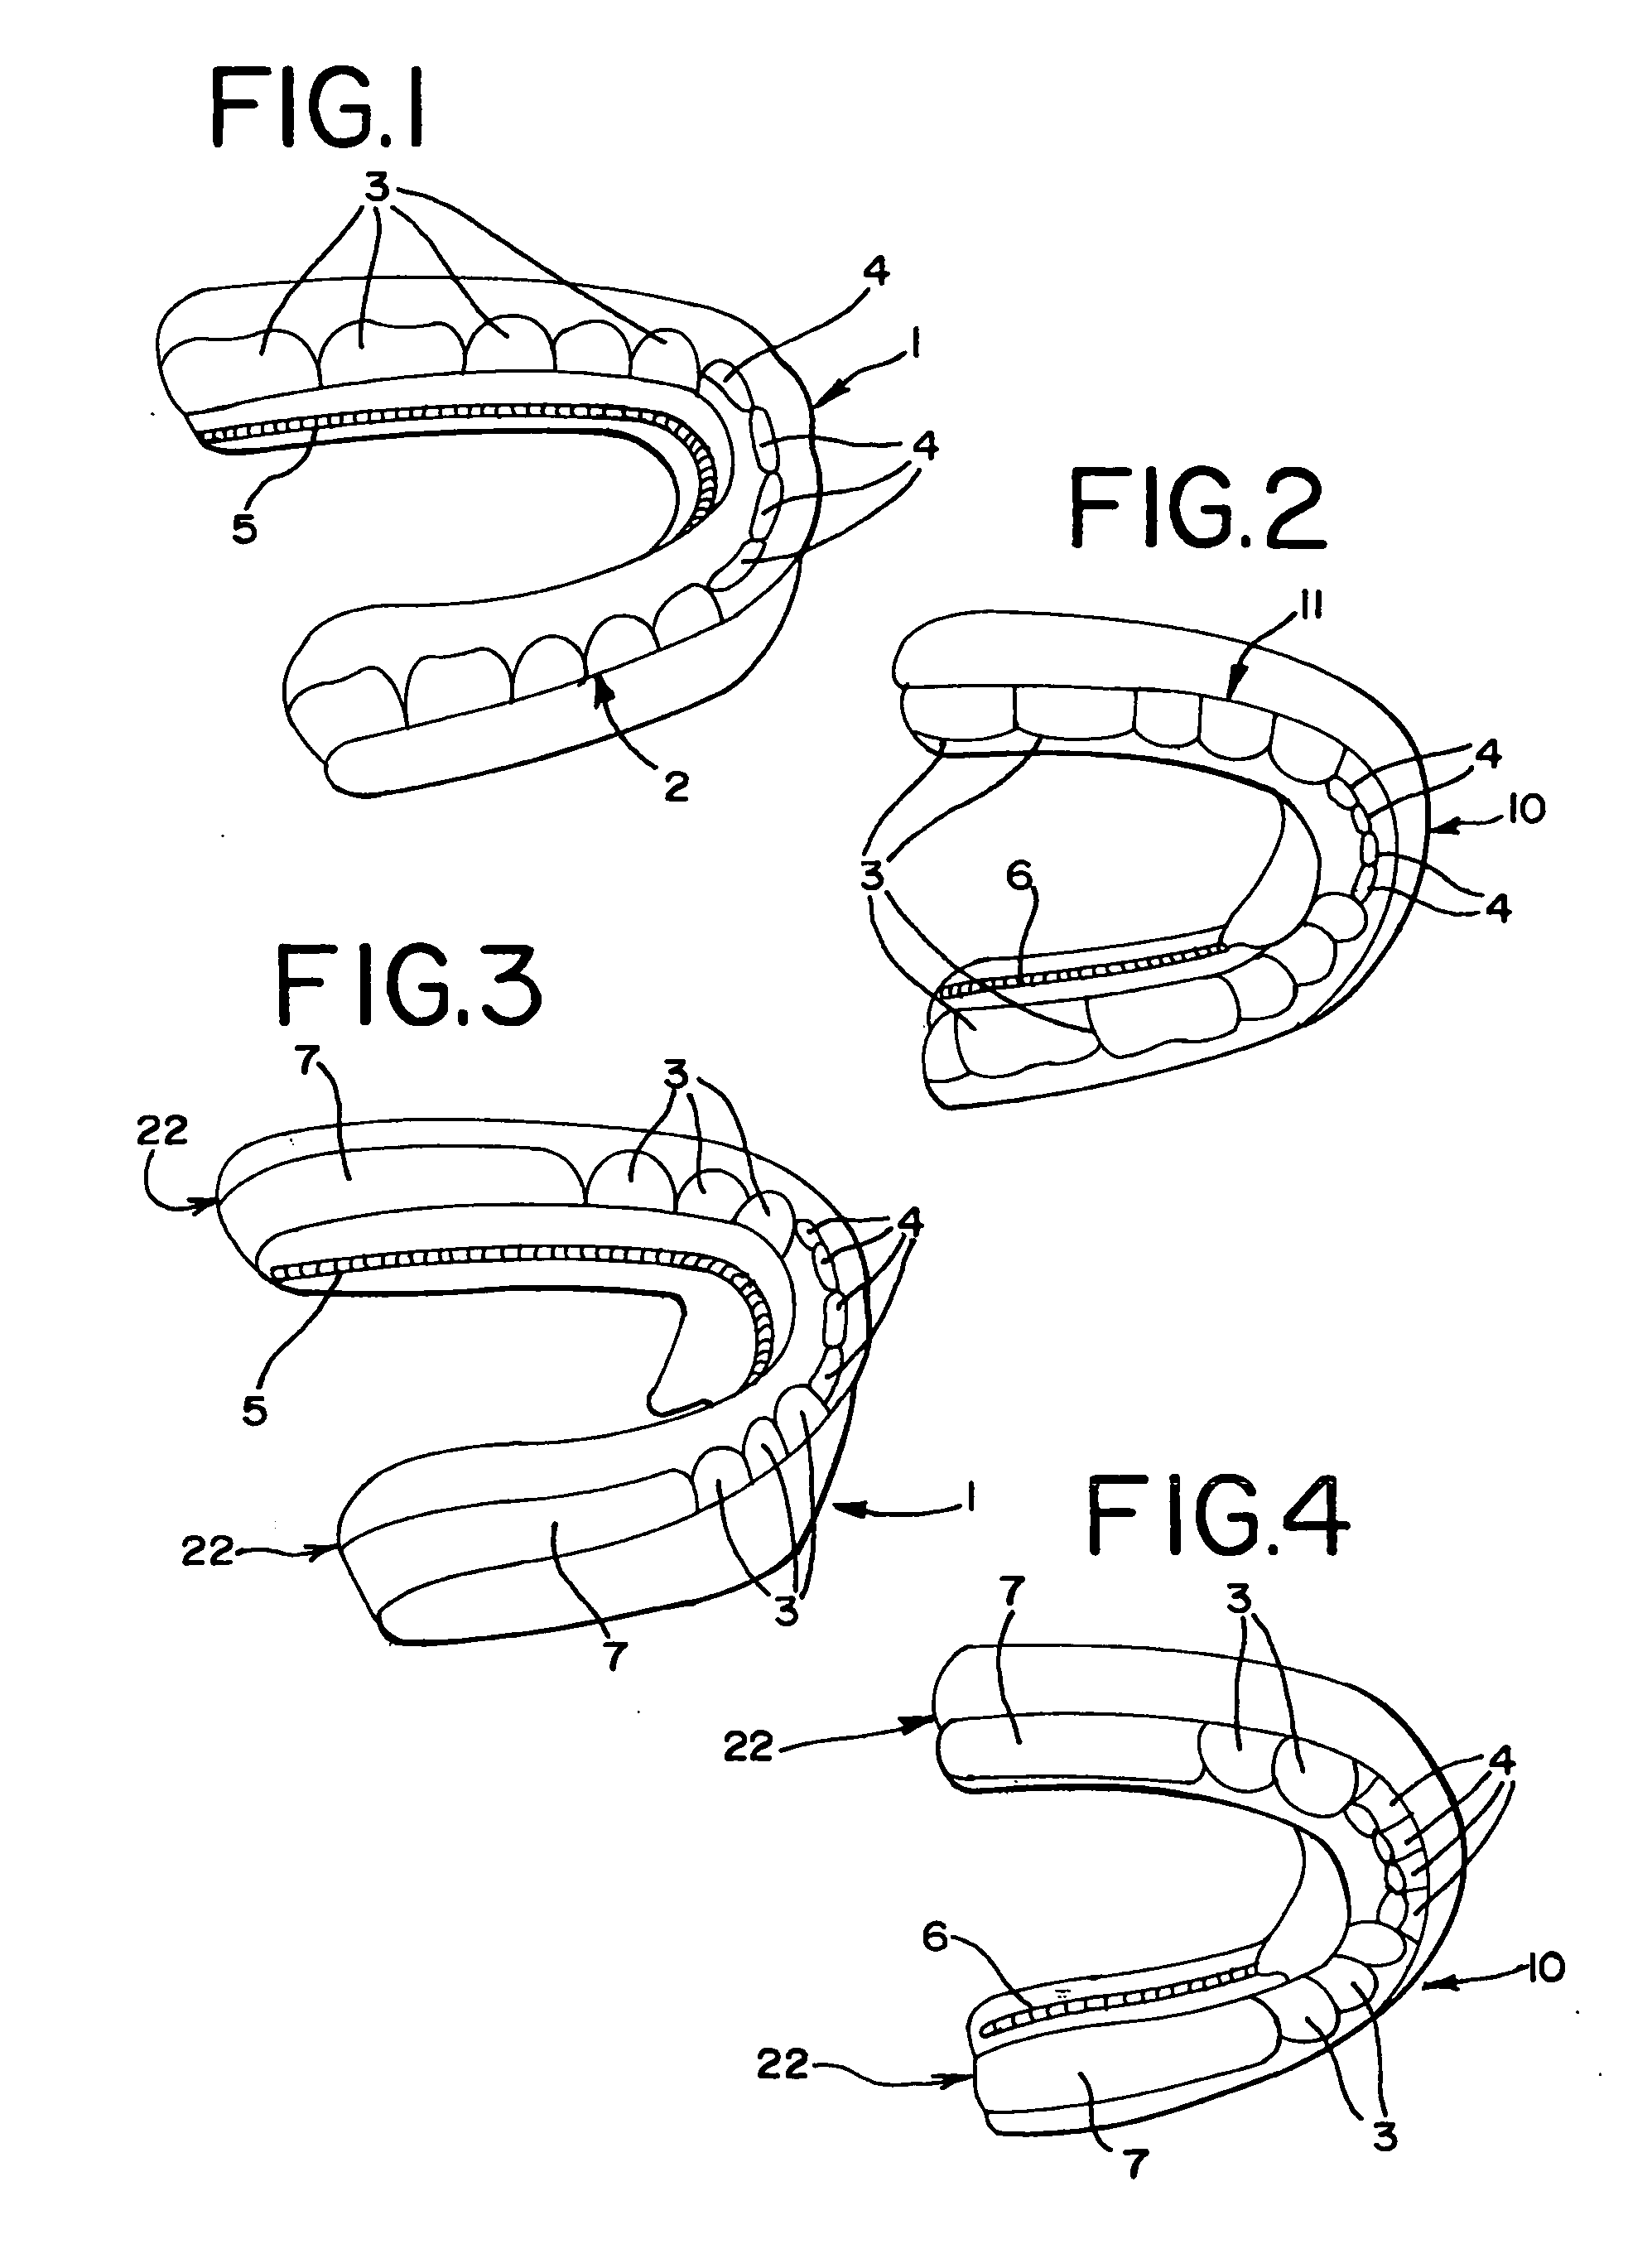 Upper and a lower single preformed and/or customized appliance and a method for attaching the appliance to a first area of a dentition and moving teeth at a second area of the dentition